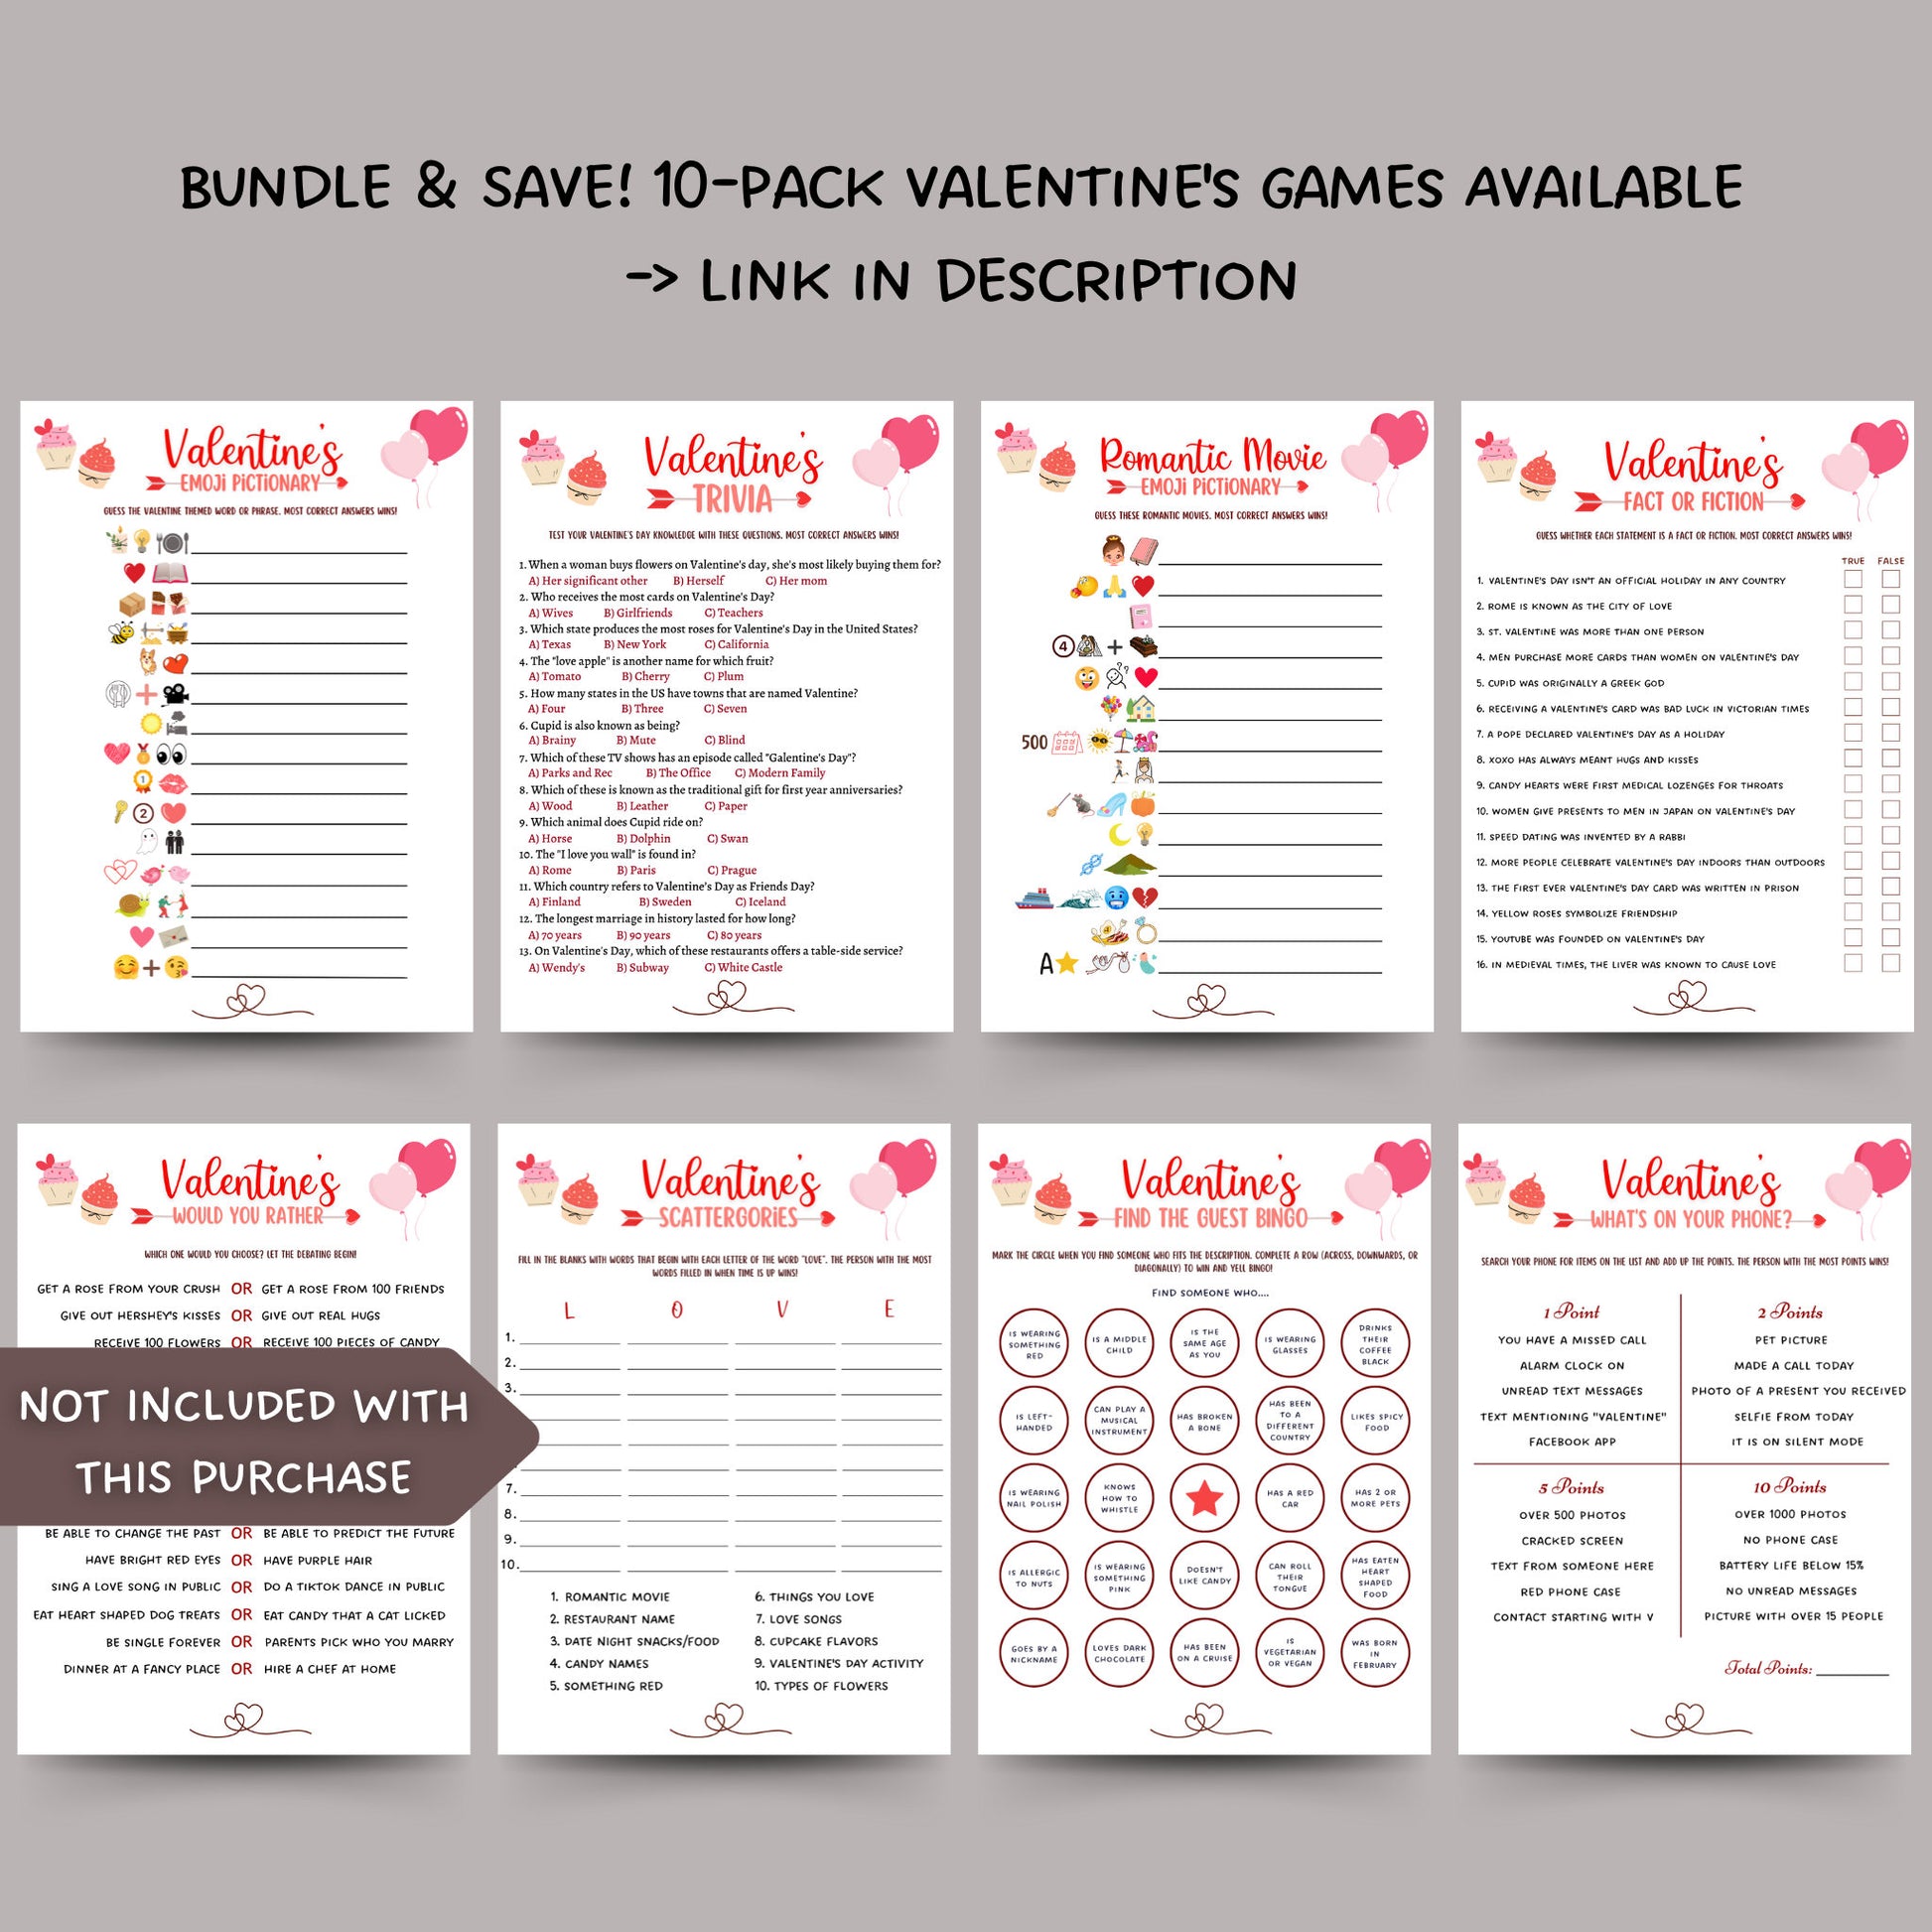 Valentine's Day Trivia Game Printable, Galentines Day Party Game, Valentines Day Activity, Fun Game for Adults, Valentine Trivia Family Game